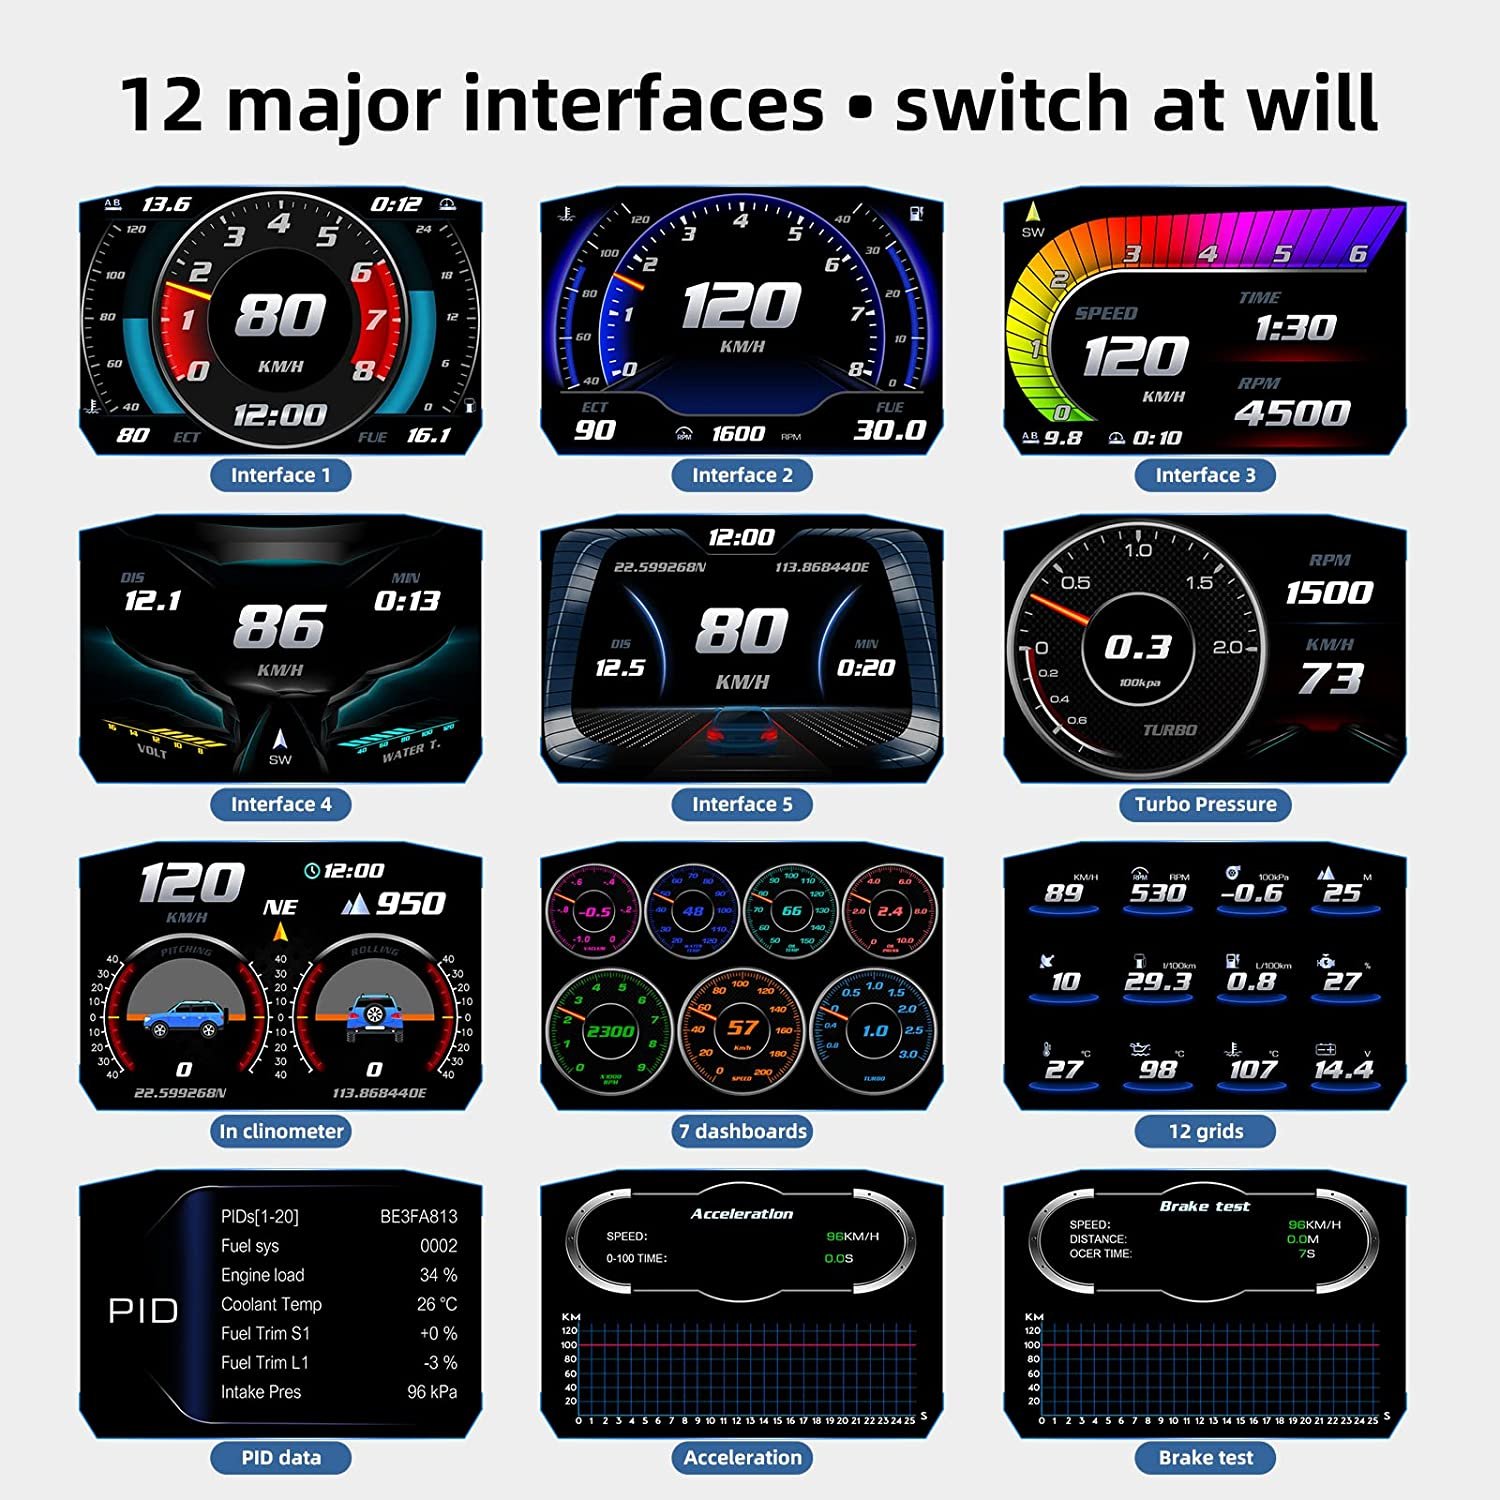 Digital OBD2 Speedometer Car HUD Head Up Display with Speed MPH, Tachometer, Troubleshooting, Improvement Warning Function HD Display universal for car Image 